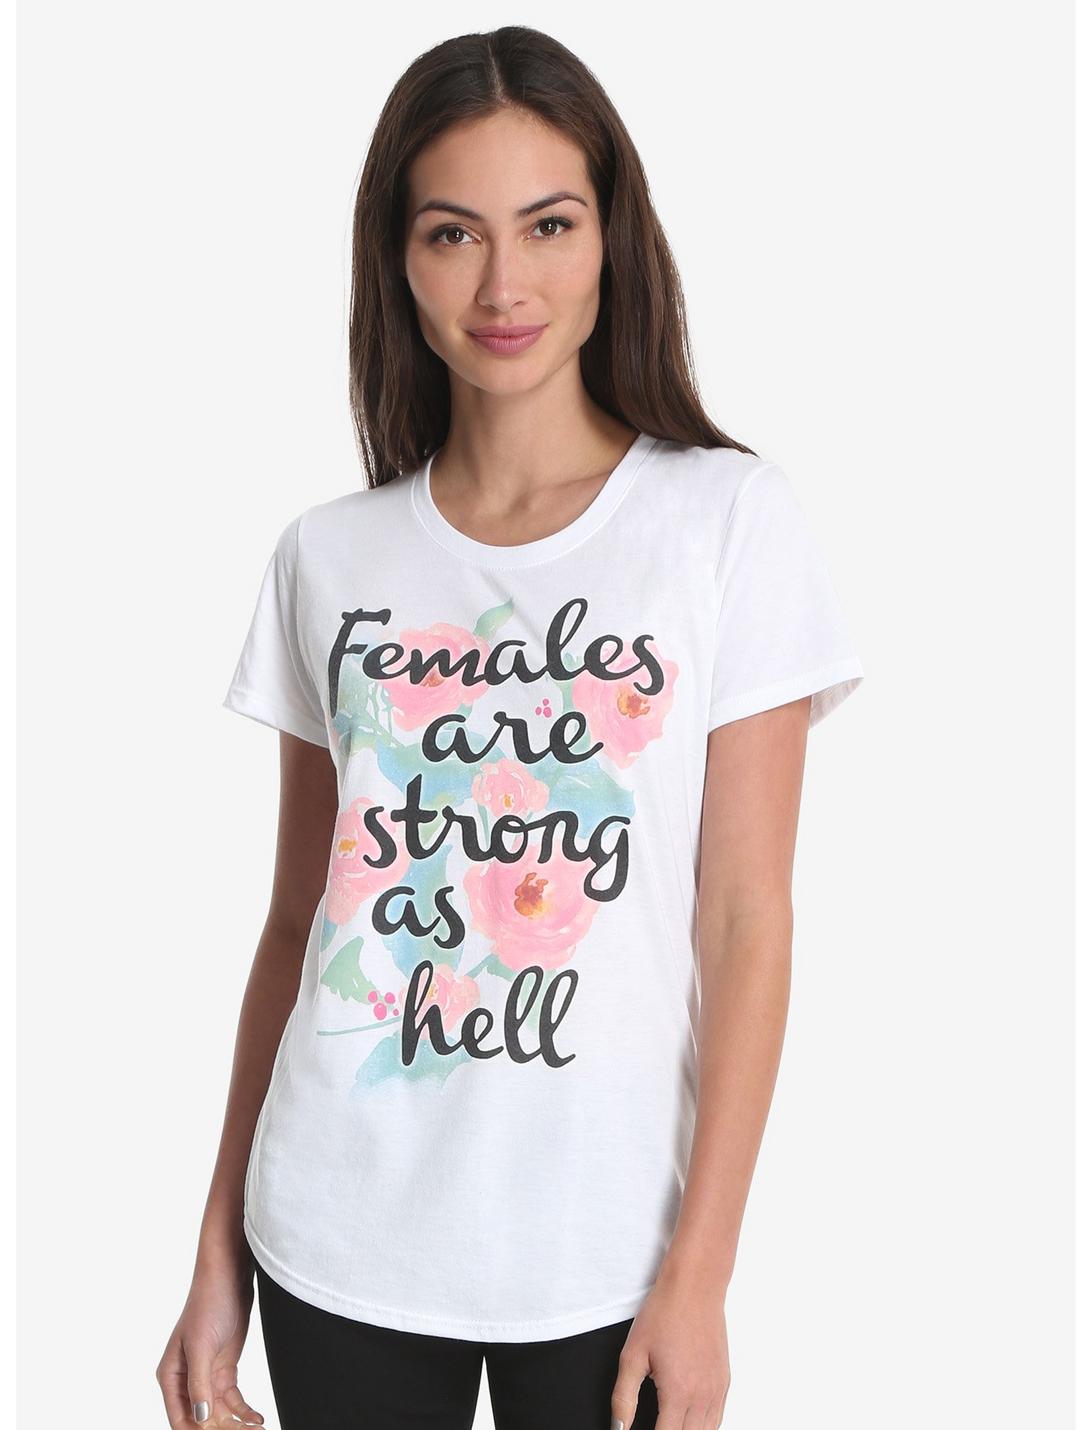 Unbreakable Kimmy Schmidt Females Are Strong Womens Tee, WHITE, hi-res